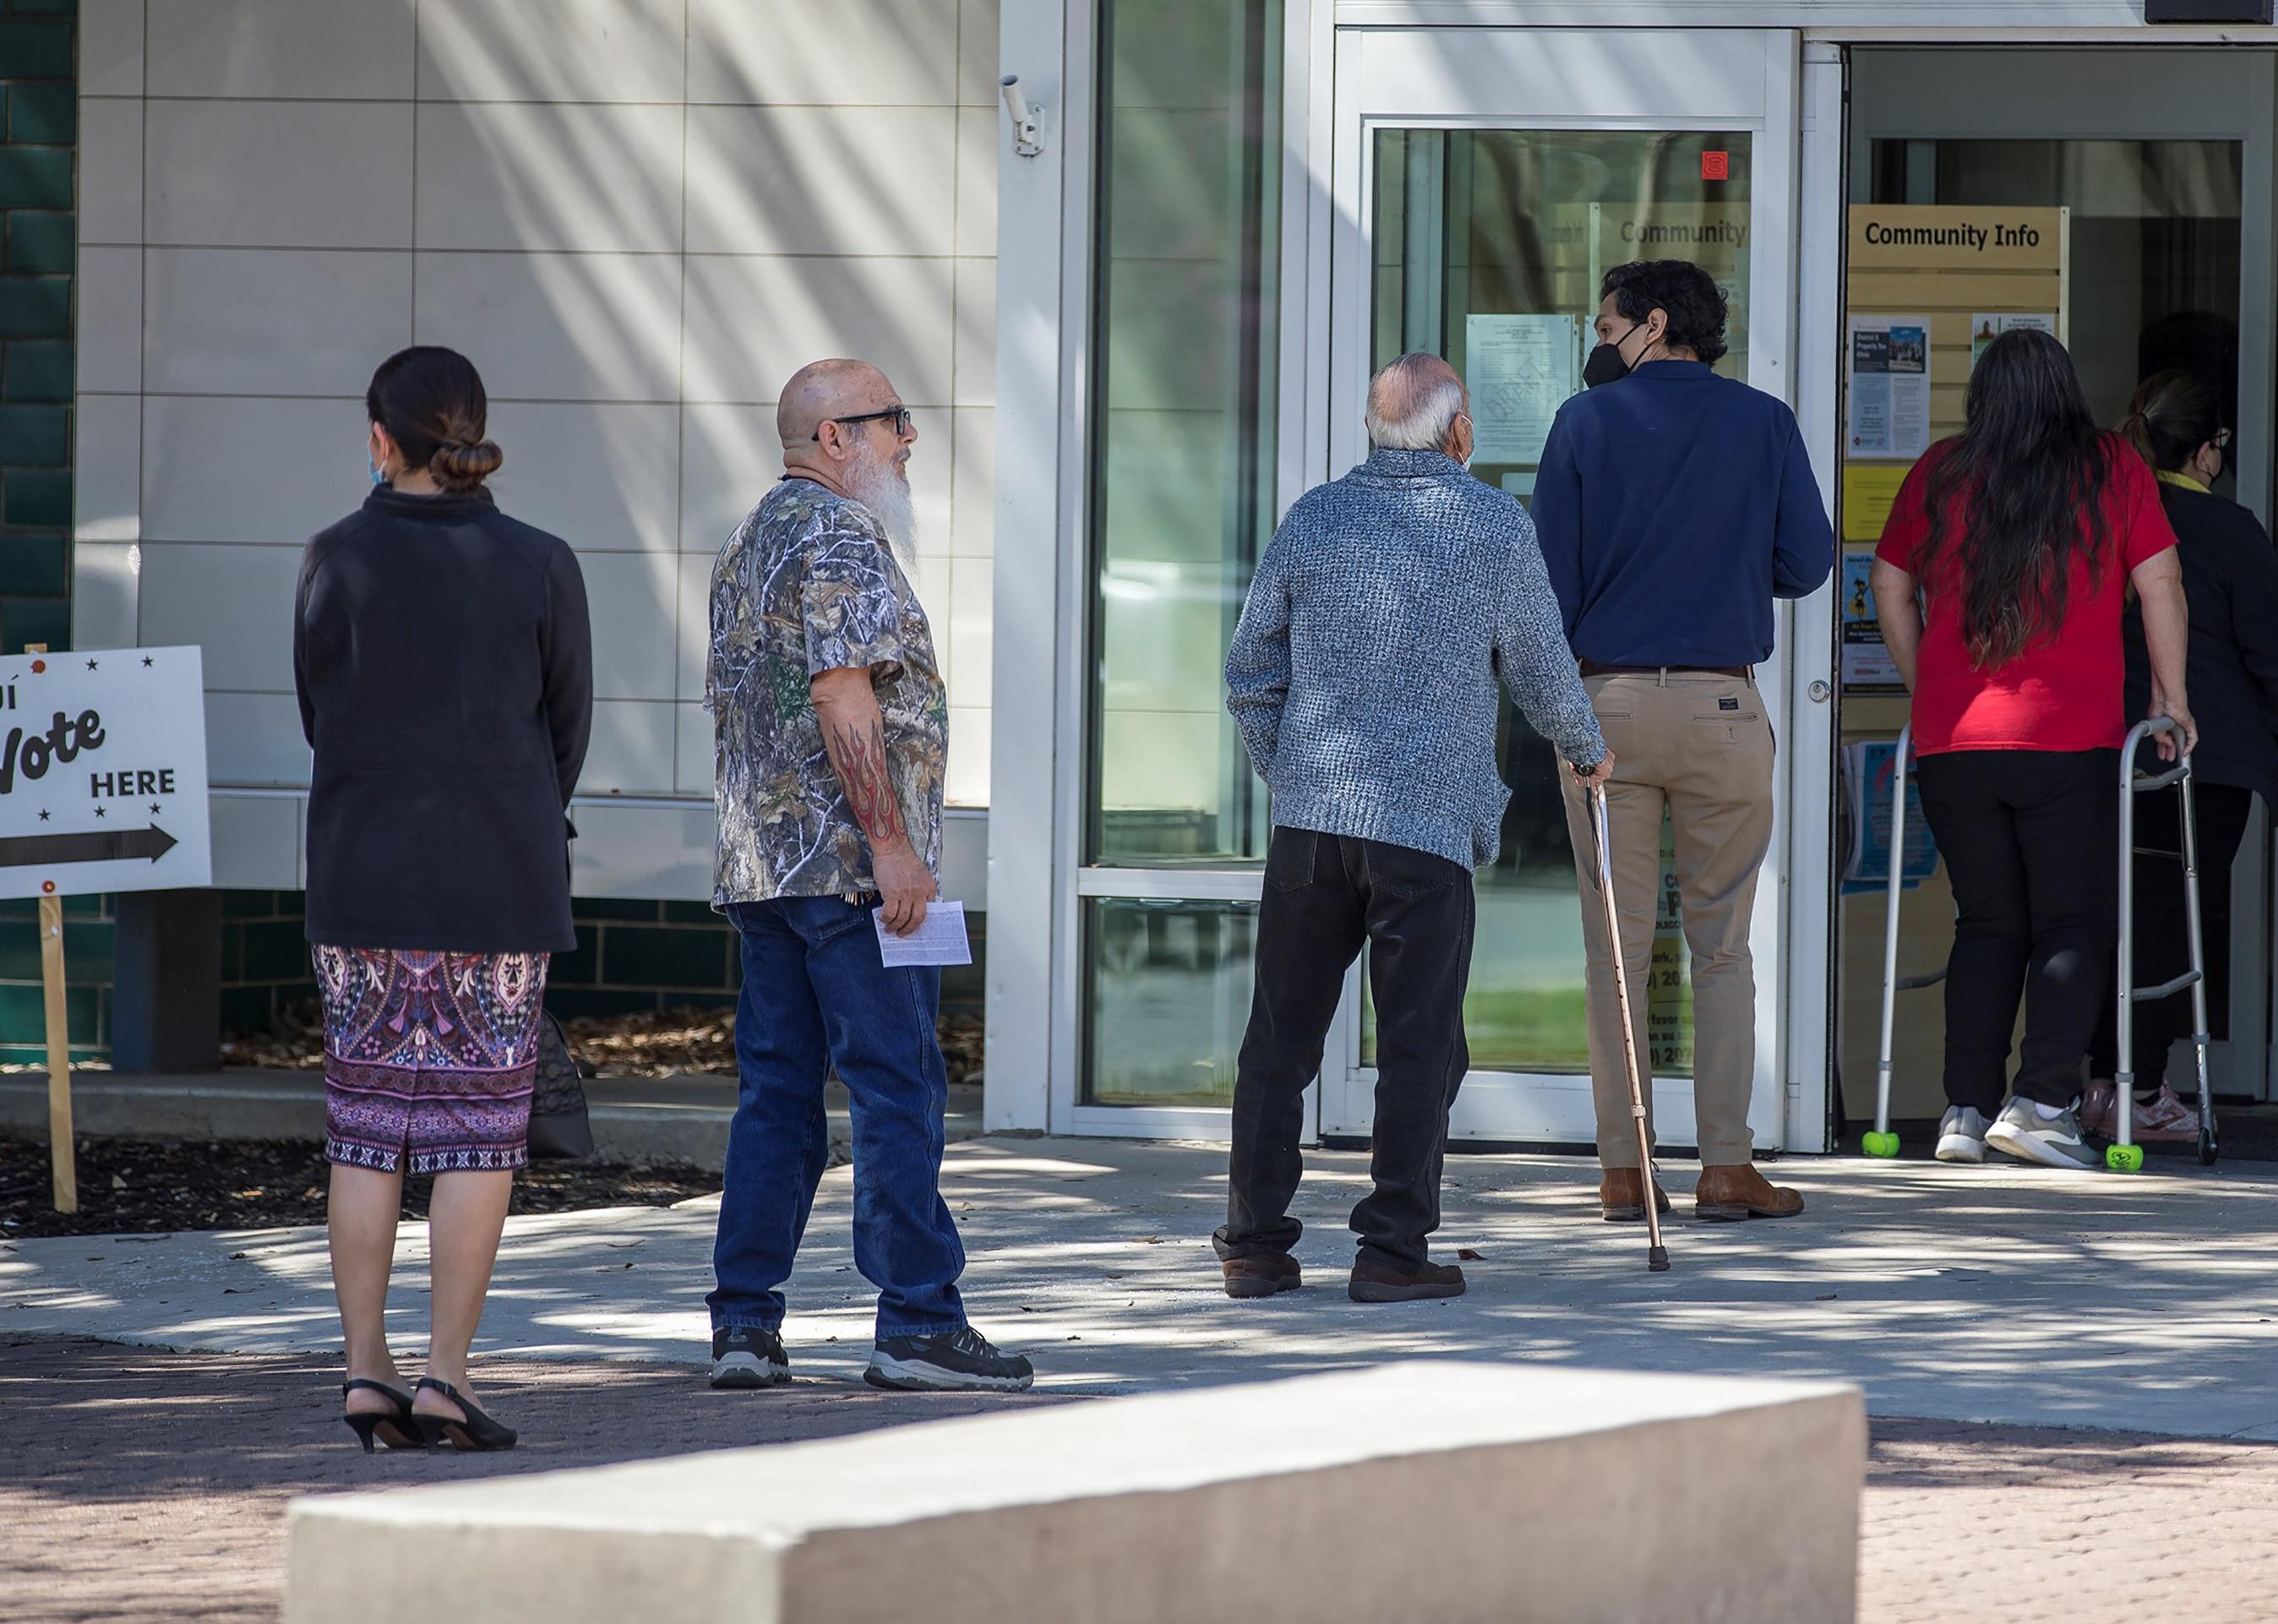 Voters wait in line to cast their ballots in the Texas 2022 primary election in San Antonio, Texas